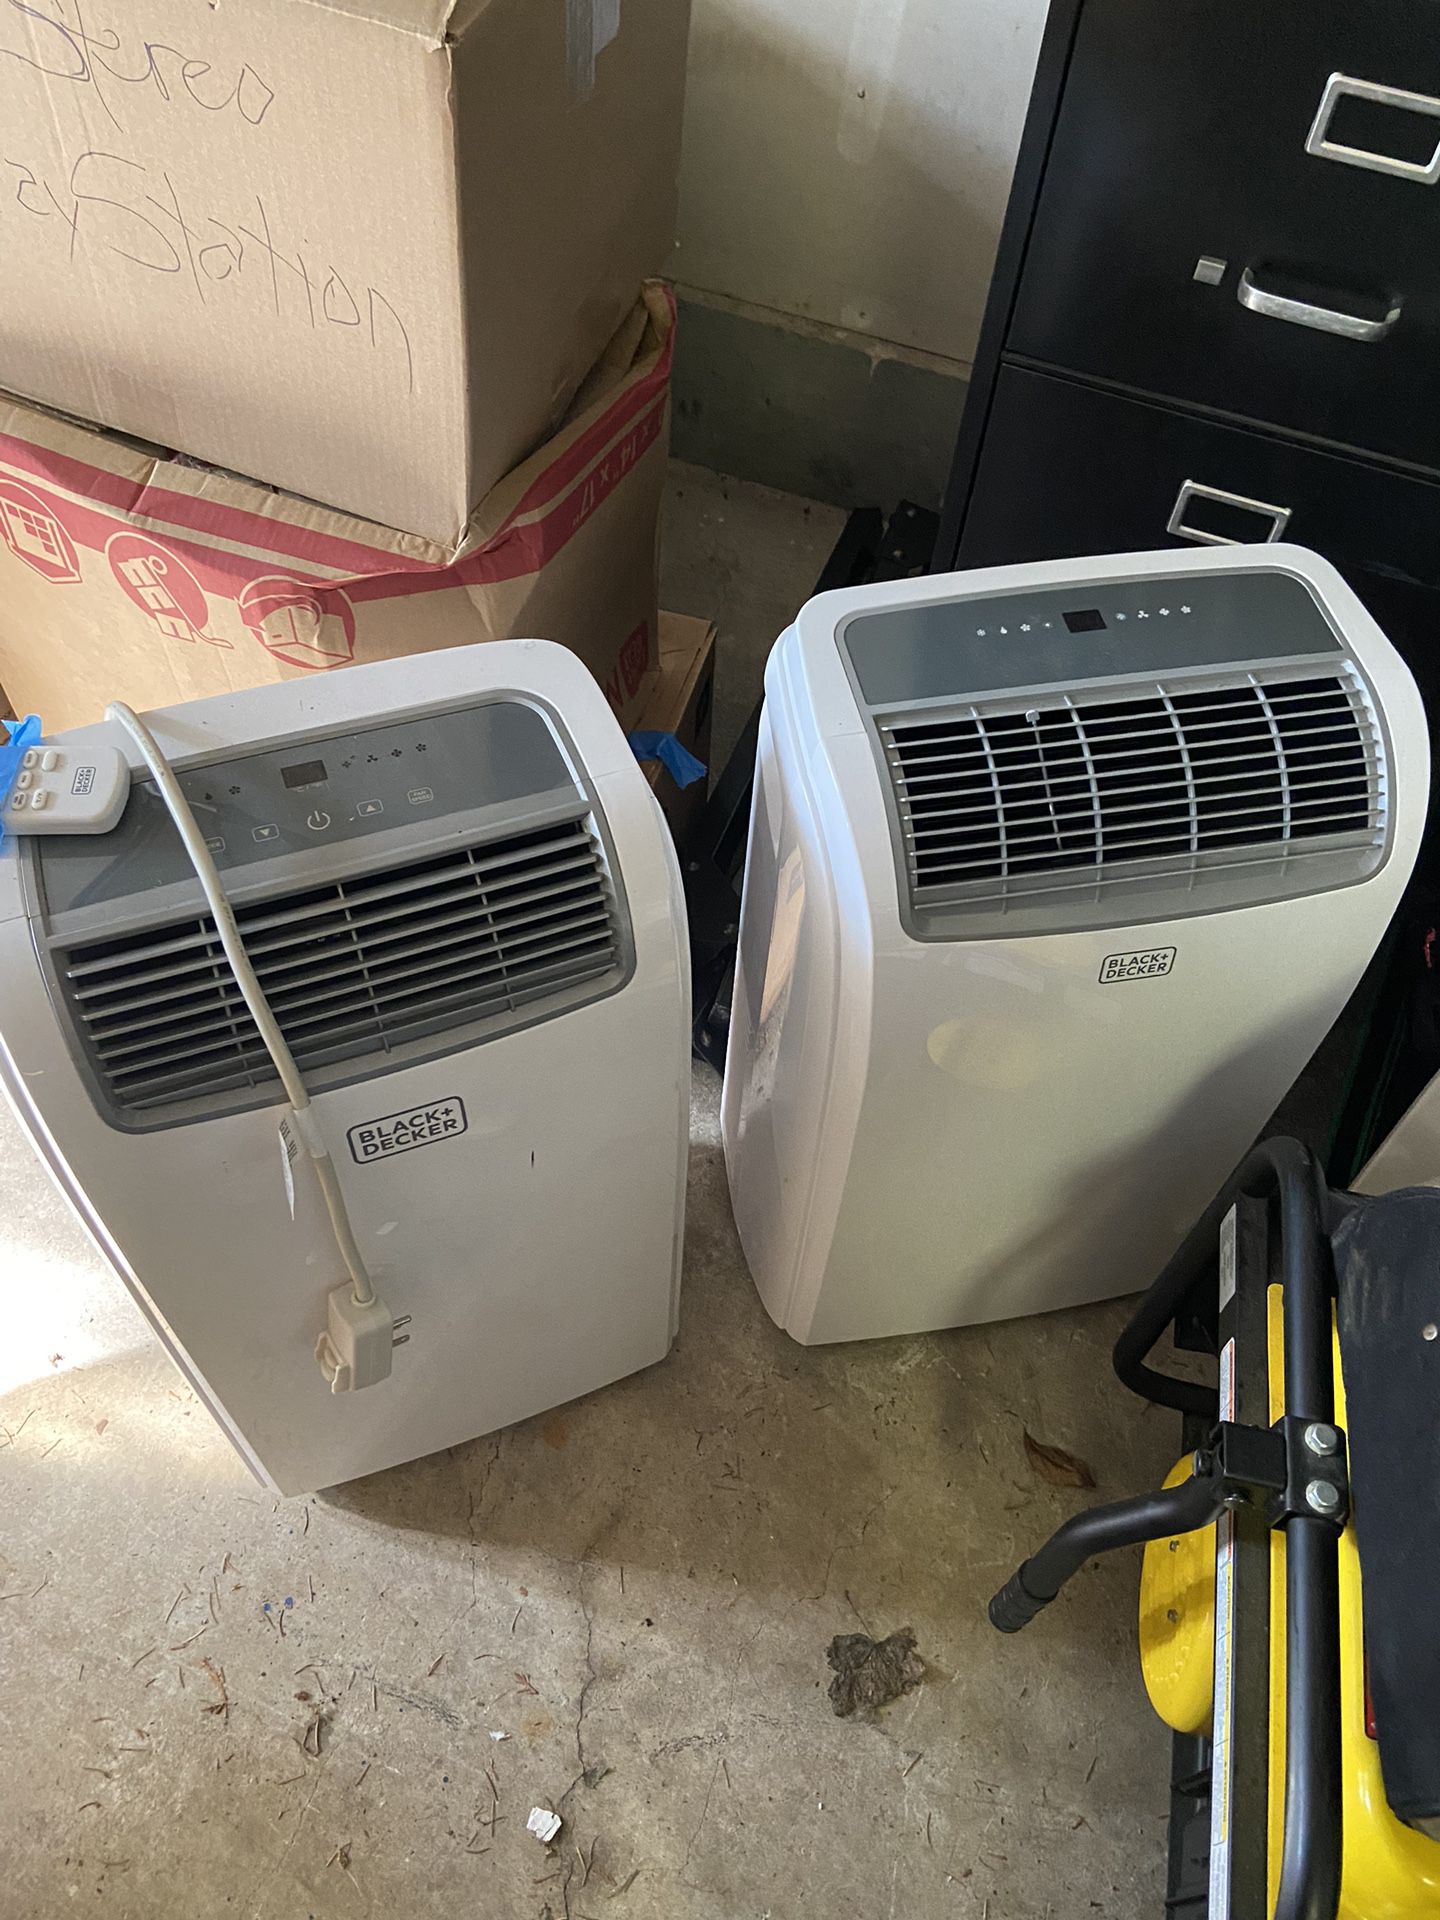 2 Like New Roll Away Air Conditioner/heaters